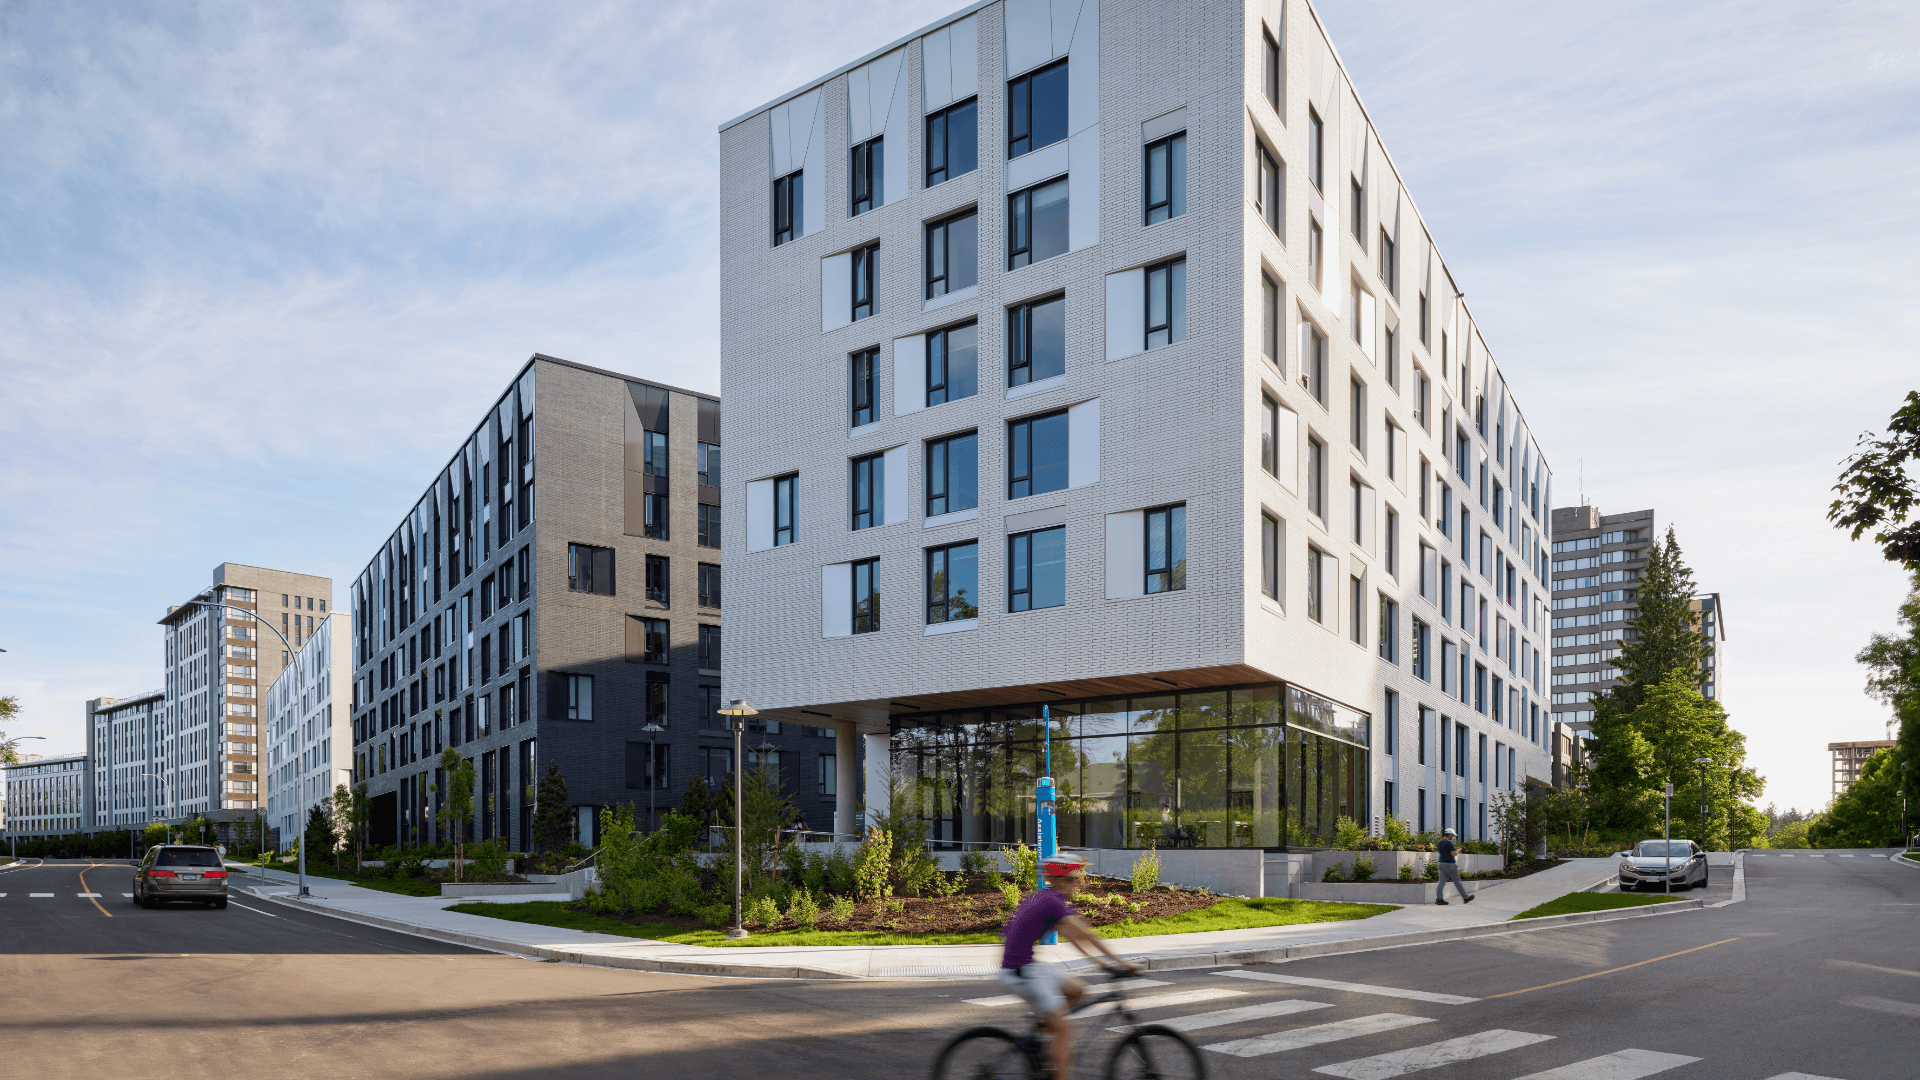 Exterior photo of the building project in daylight with cyclist riding past in blur of motion